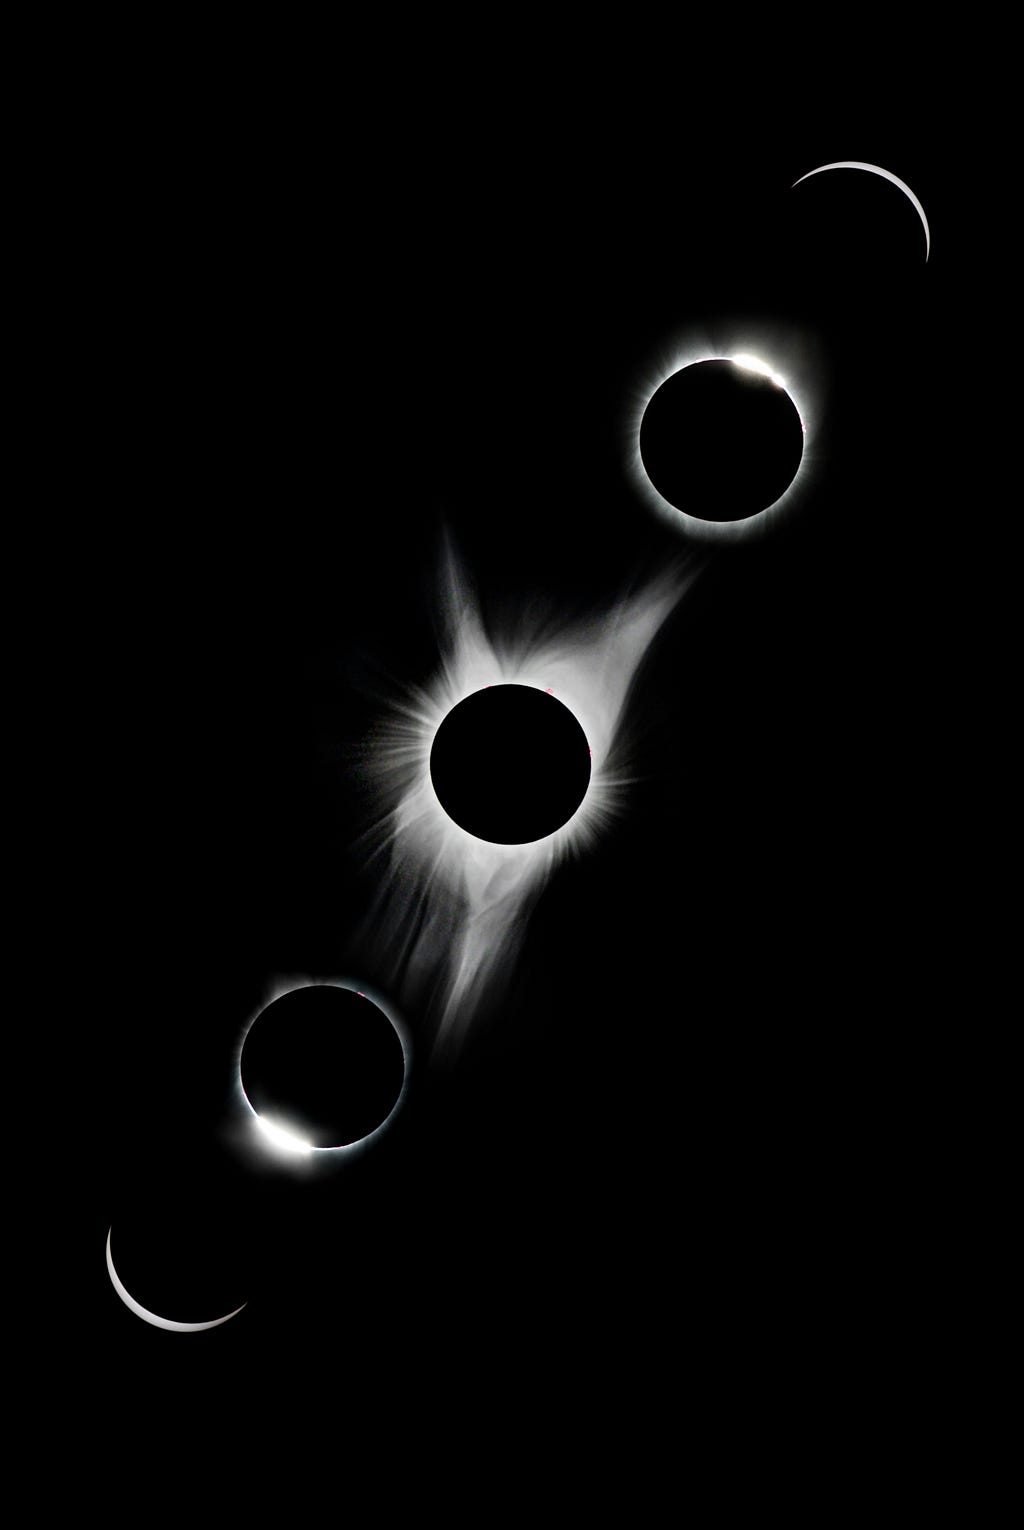 Eclipse in parts on black background, showing a cycle in progress